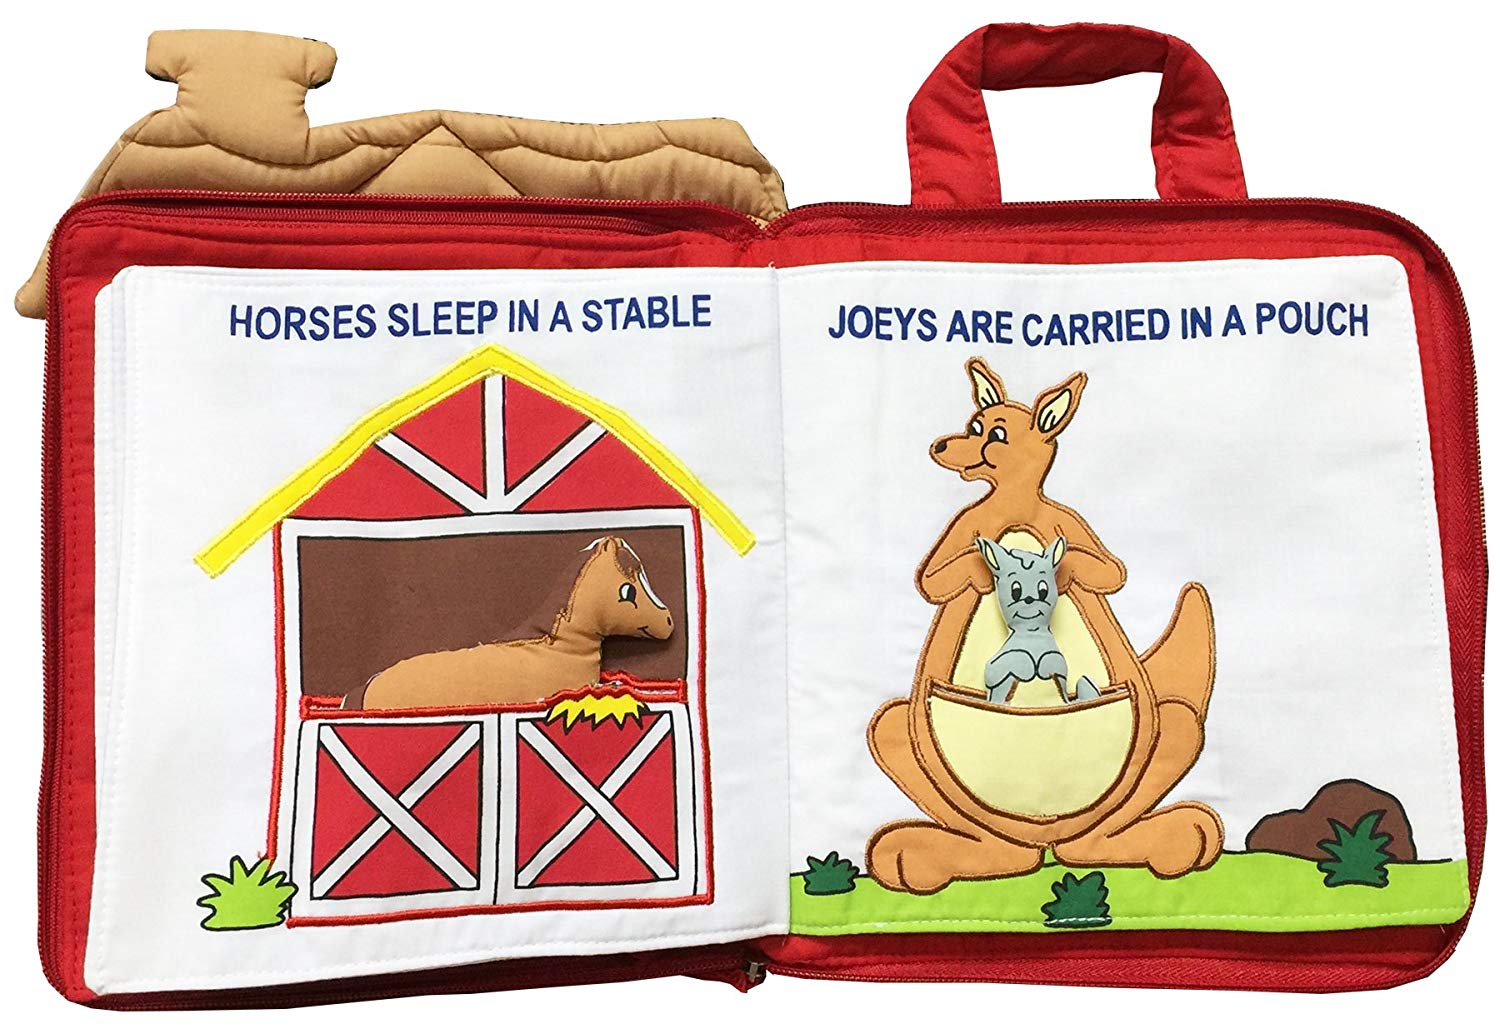 Right at Home Playhouse - Pockets of Learning